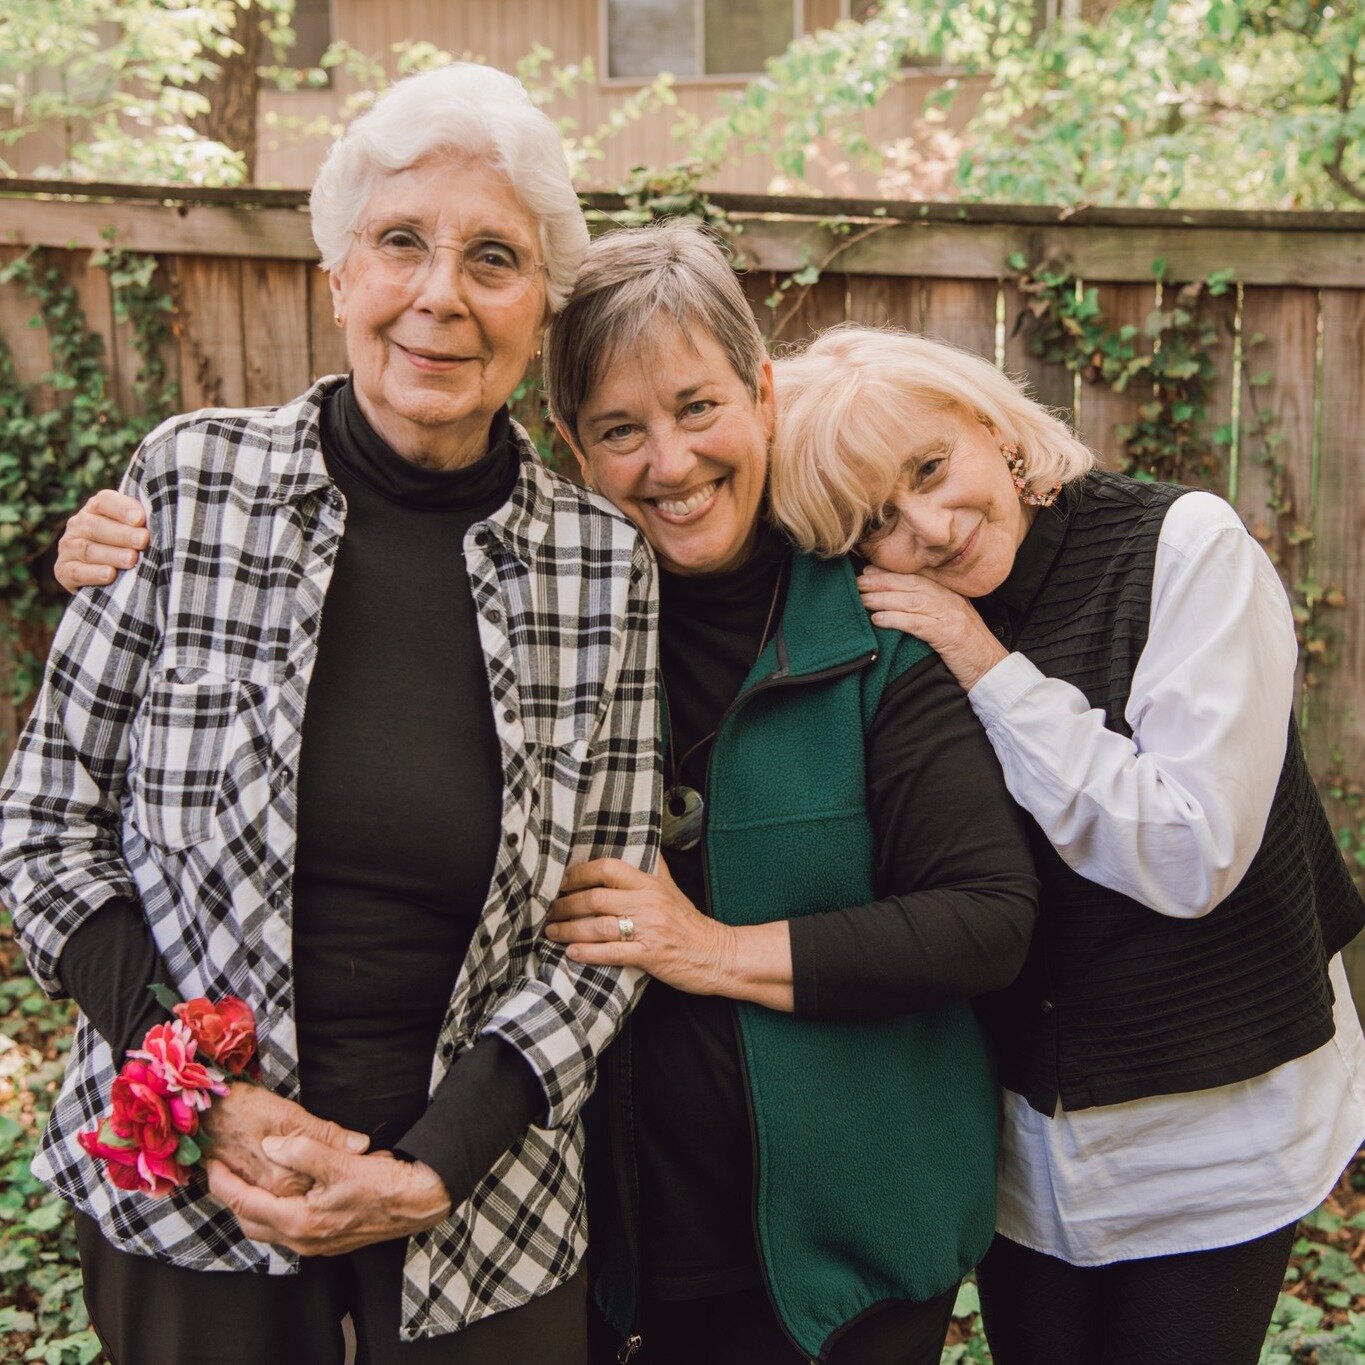 Say hello to the brilliant artists who originated, fueled, and cultivated Metro Theater Company's wonderful mission! L to R: Lynn Rubright, MTC Co-Founder; Carol North, MTC Former Artistic Director; and Zaro Weil, MTC Co-Founder. Read about how MTC b